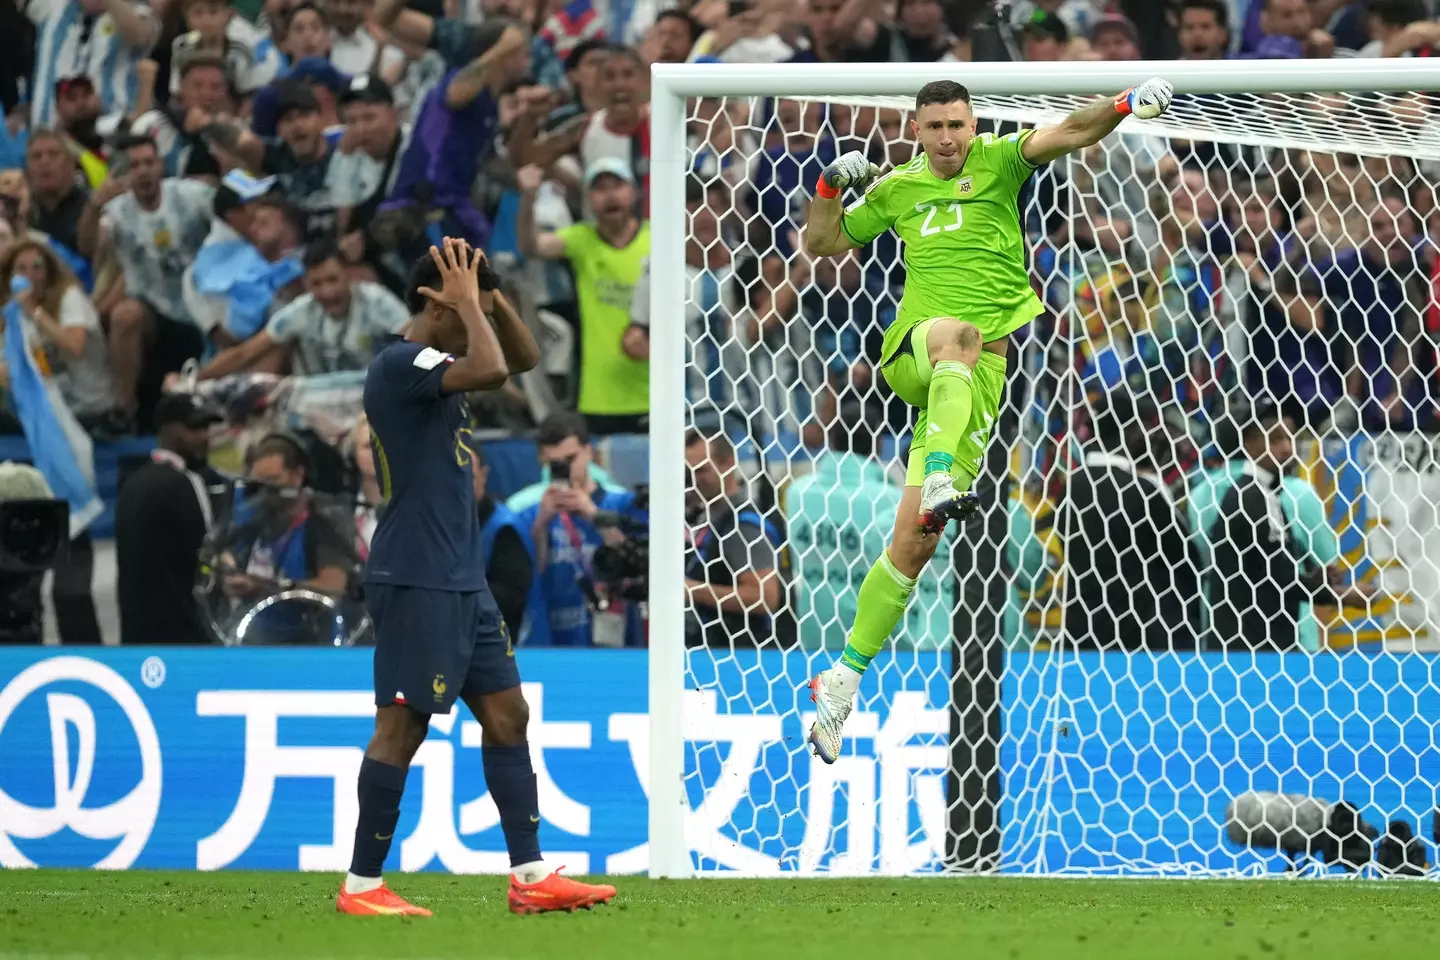 Argentina goalkeeper Emiliano Martinez (right) celebrates after saving France's Kingsley Coman's penalty in the penalty shoot-out after extra time during the FIFA World Cup final at Lusail Stadium, Qatar.